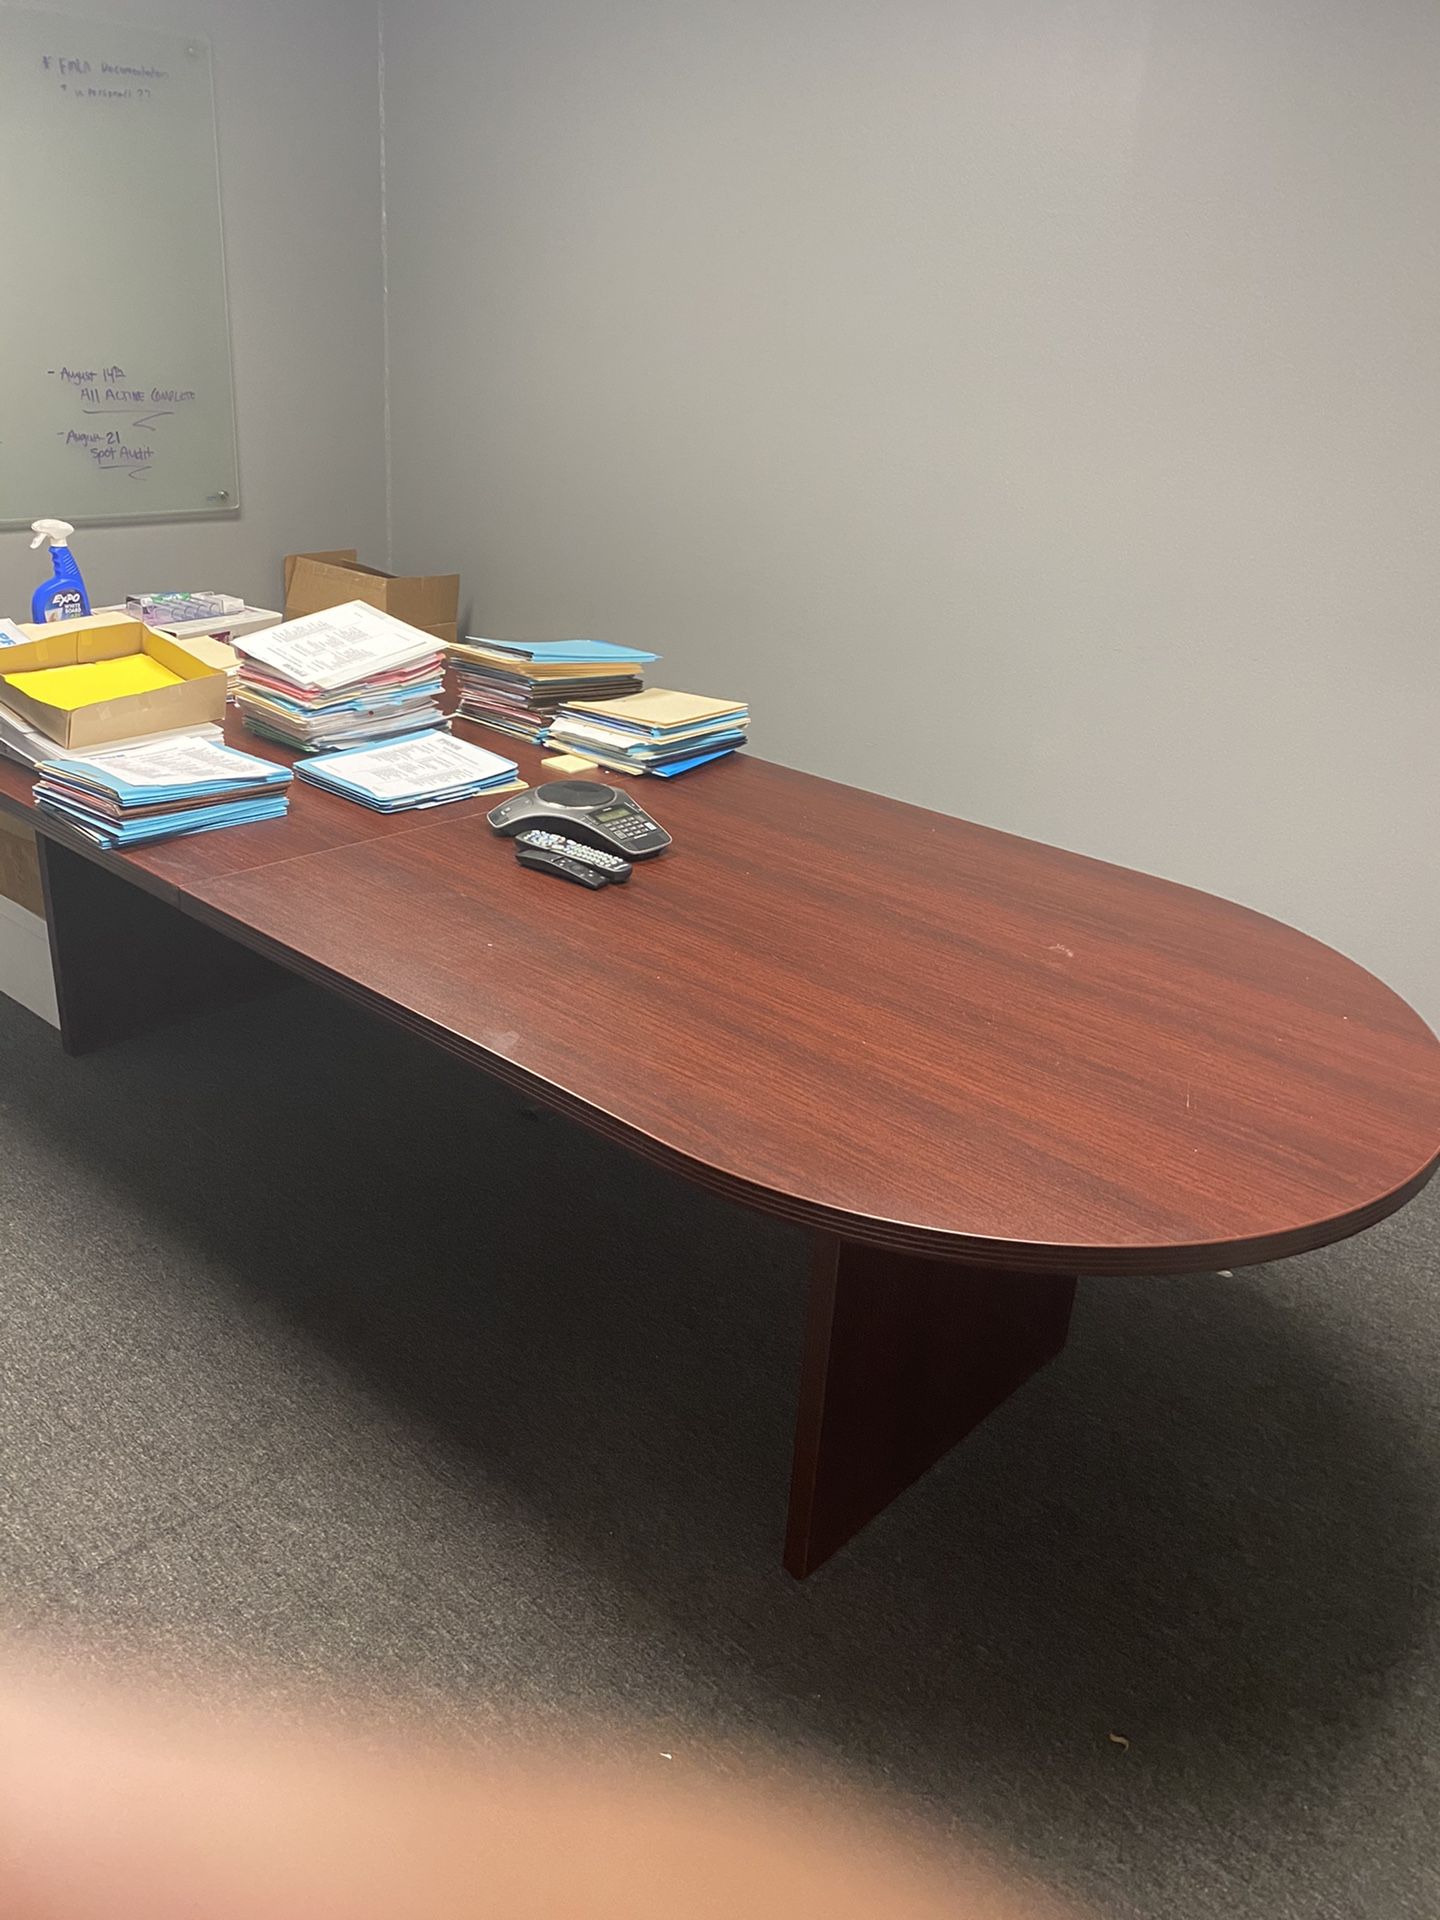 CONFERENCE ROOM TABLE